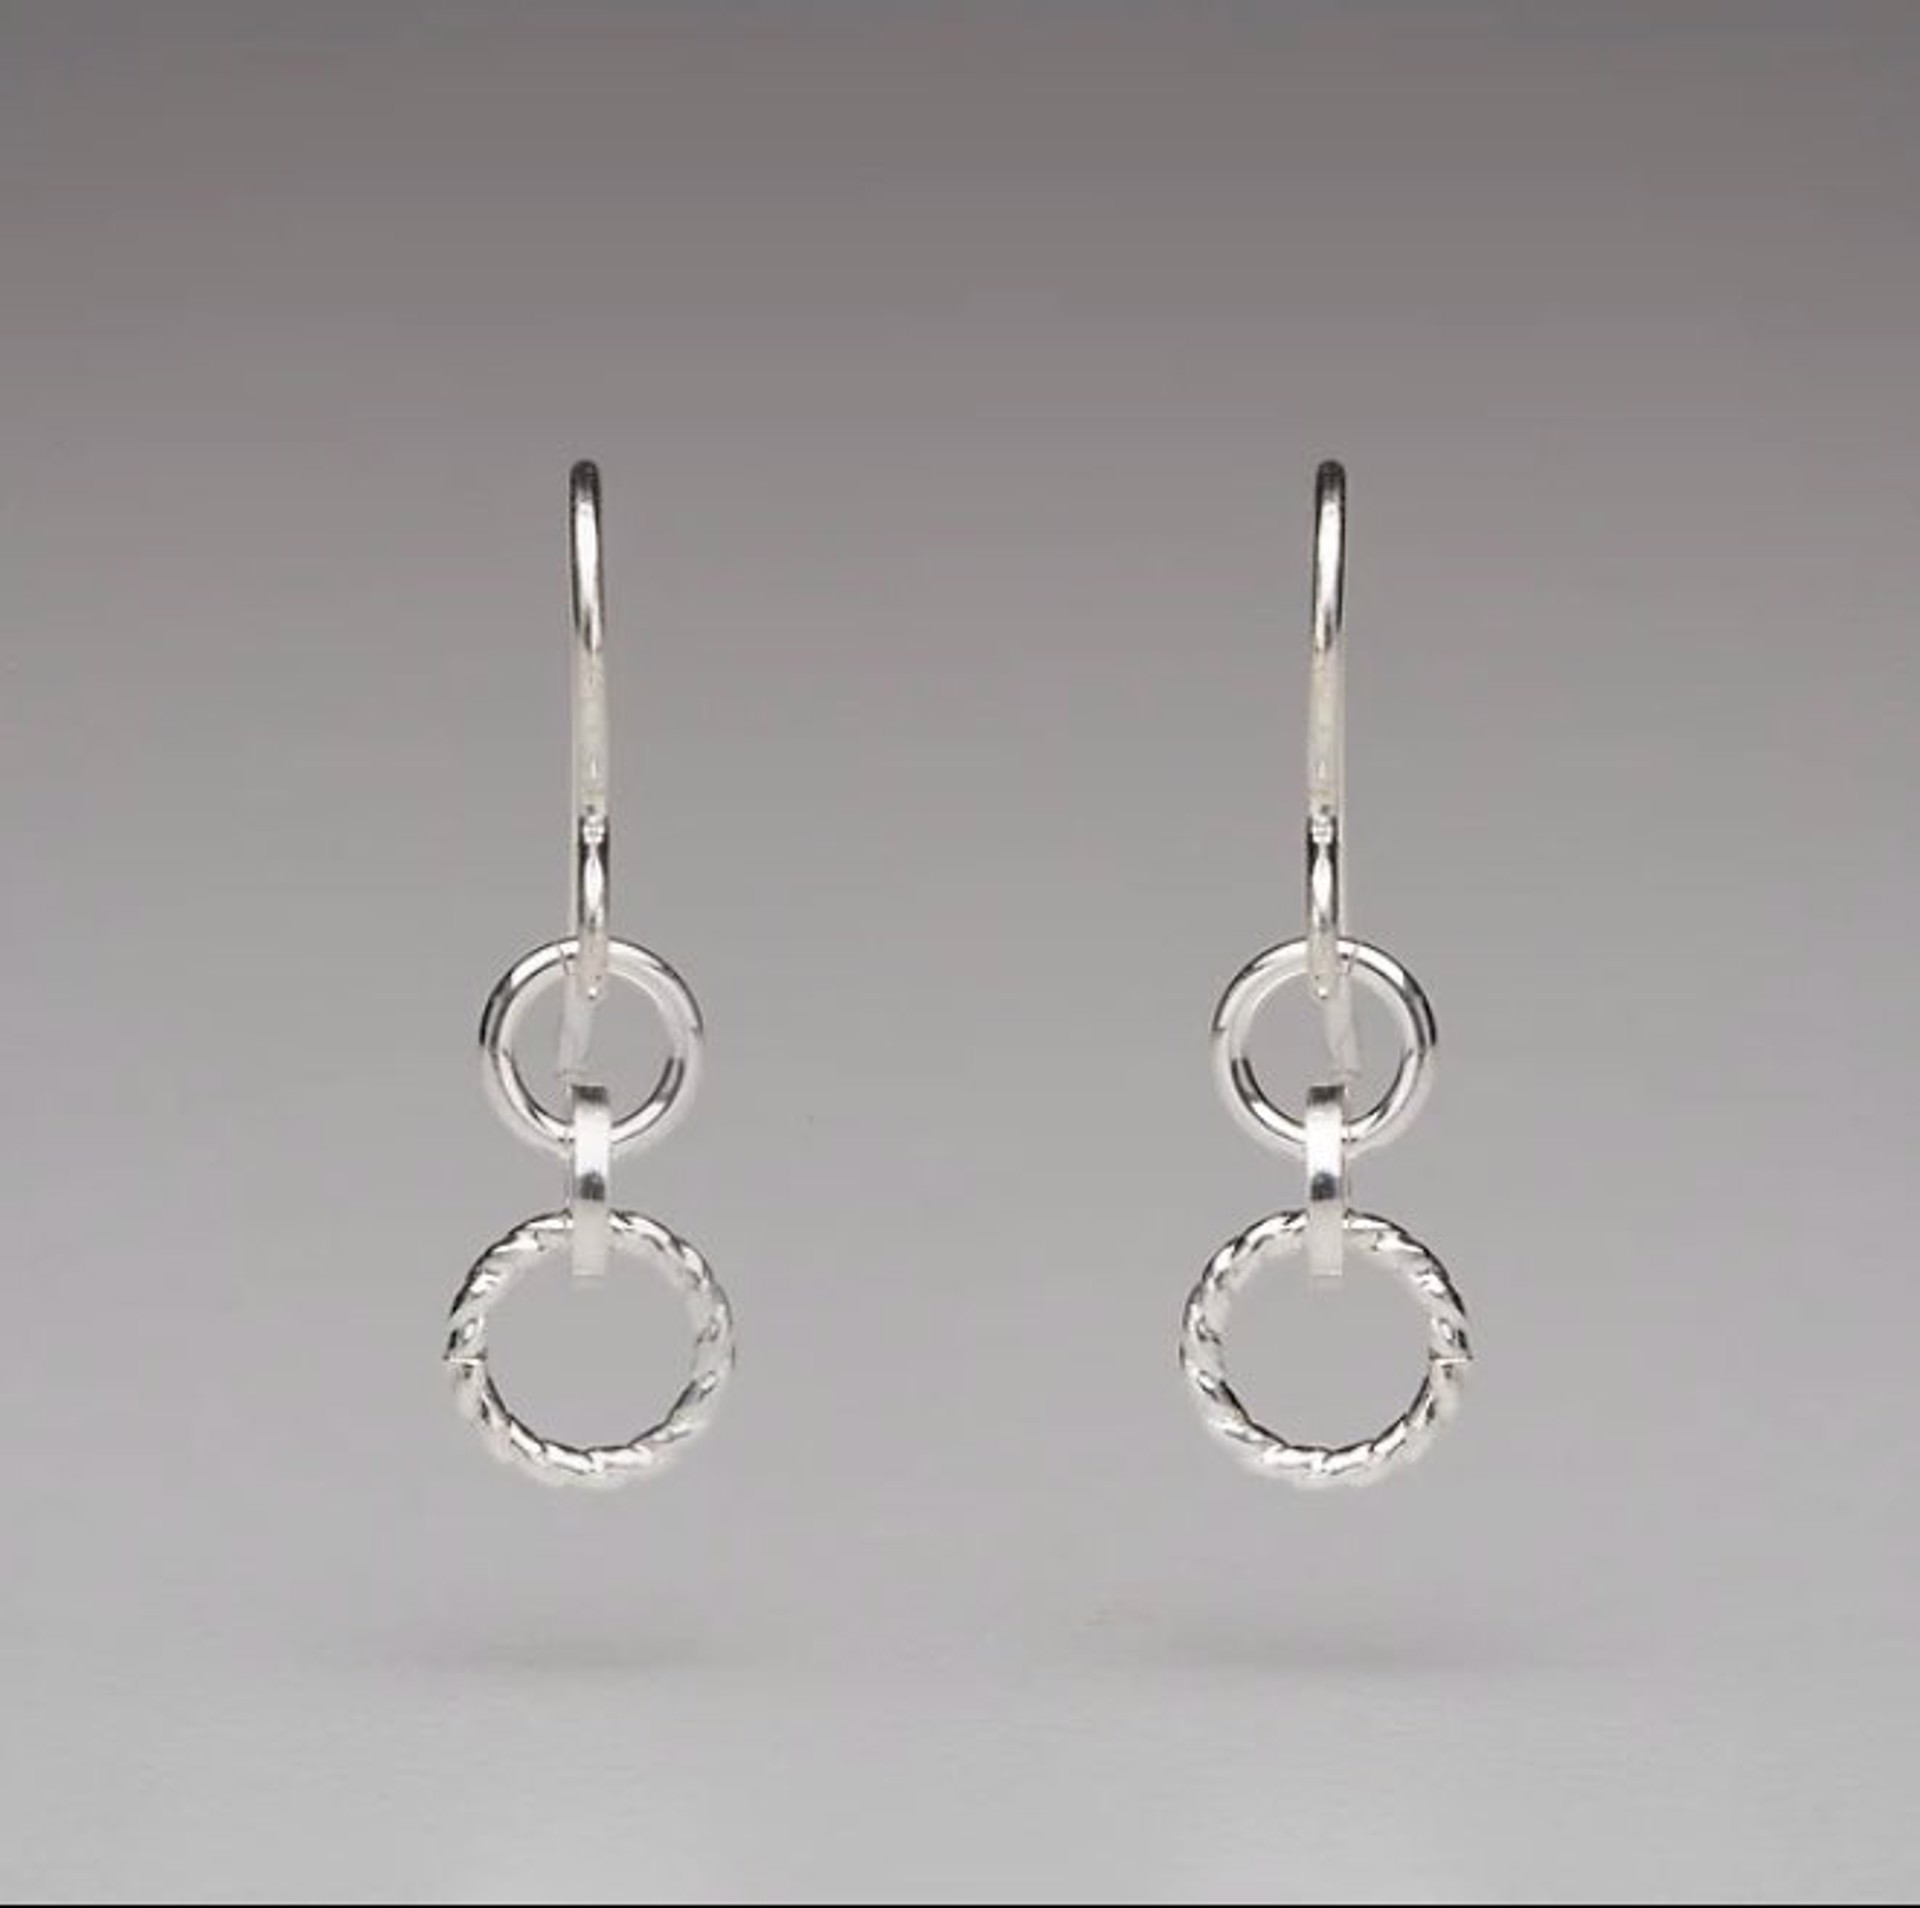 Round, Square, and Twisted Wire Earrings by Nichole Collins